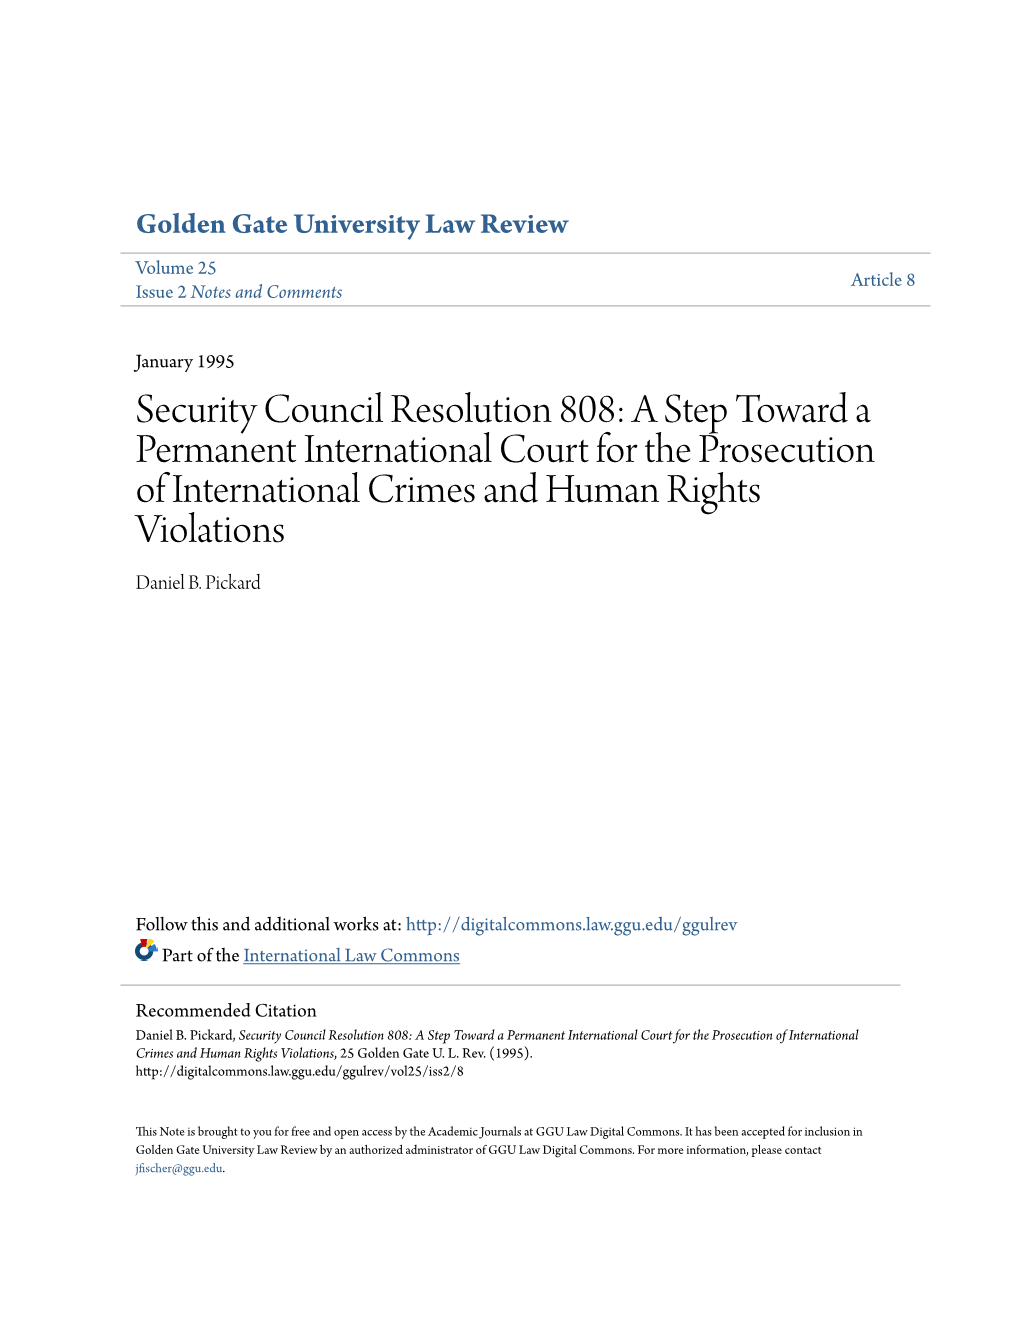 Security Council Resolution 808: a Step Toward a Permanent International Court for the Prosecution of International Crimes and Human Rights Violations Daniel B